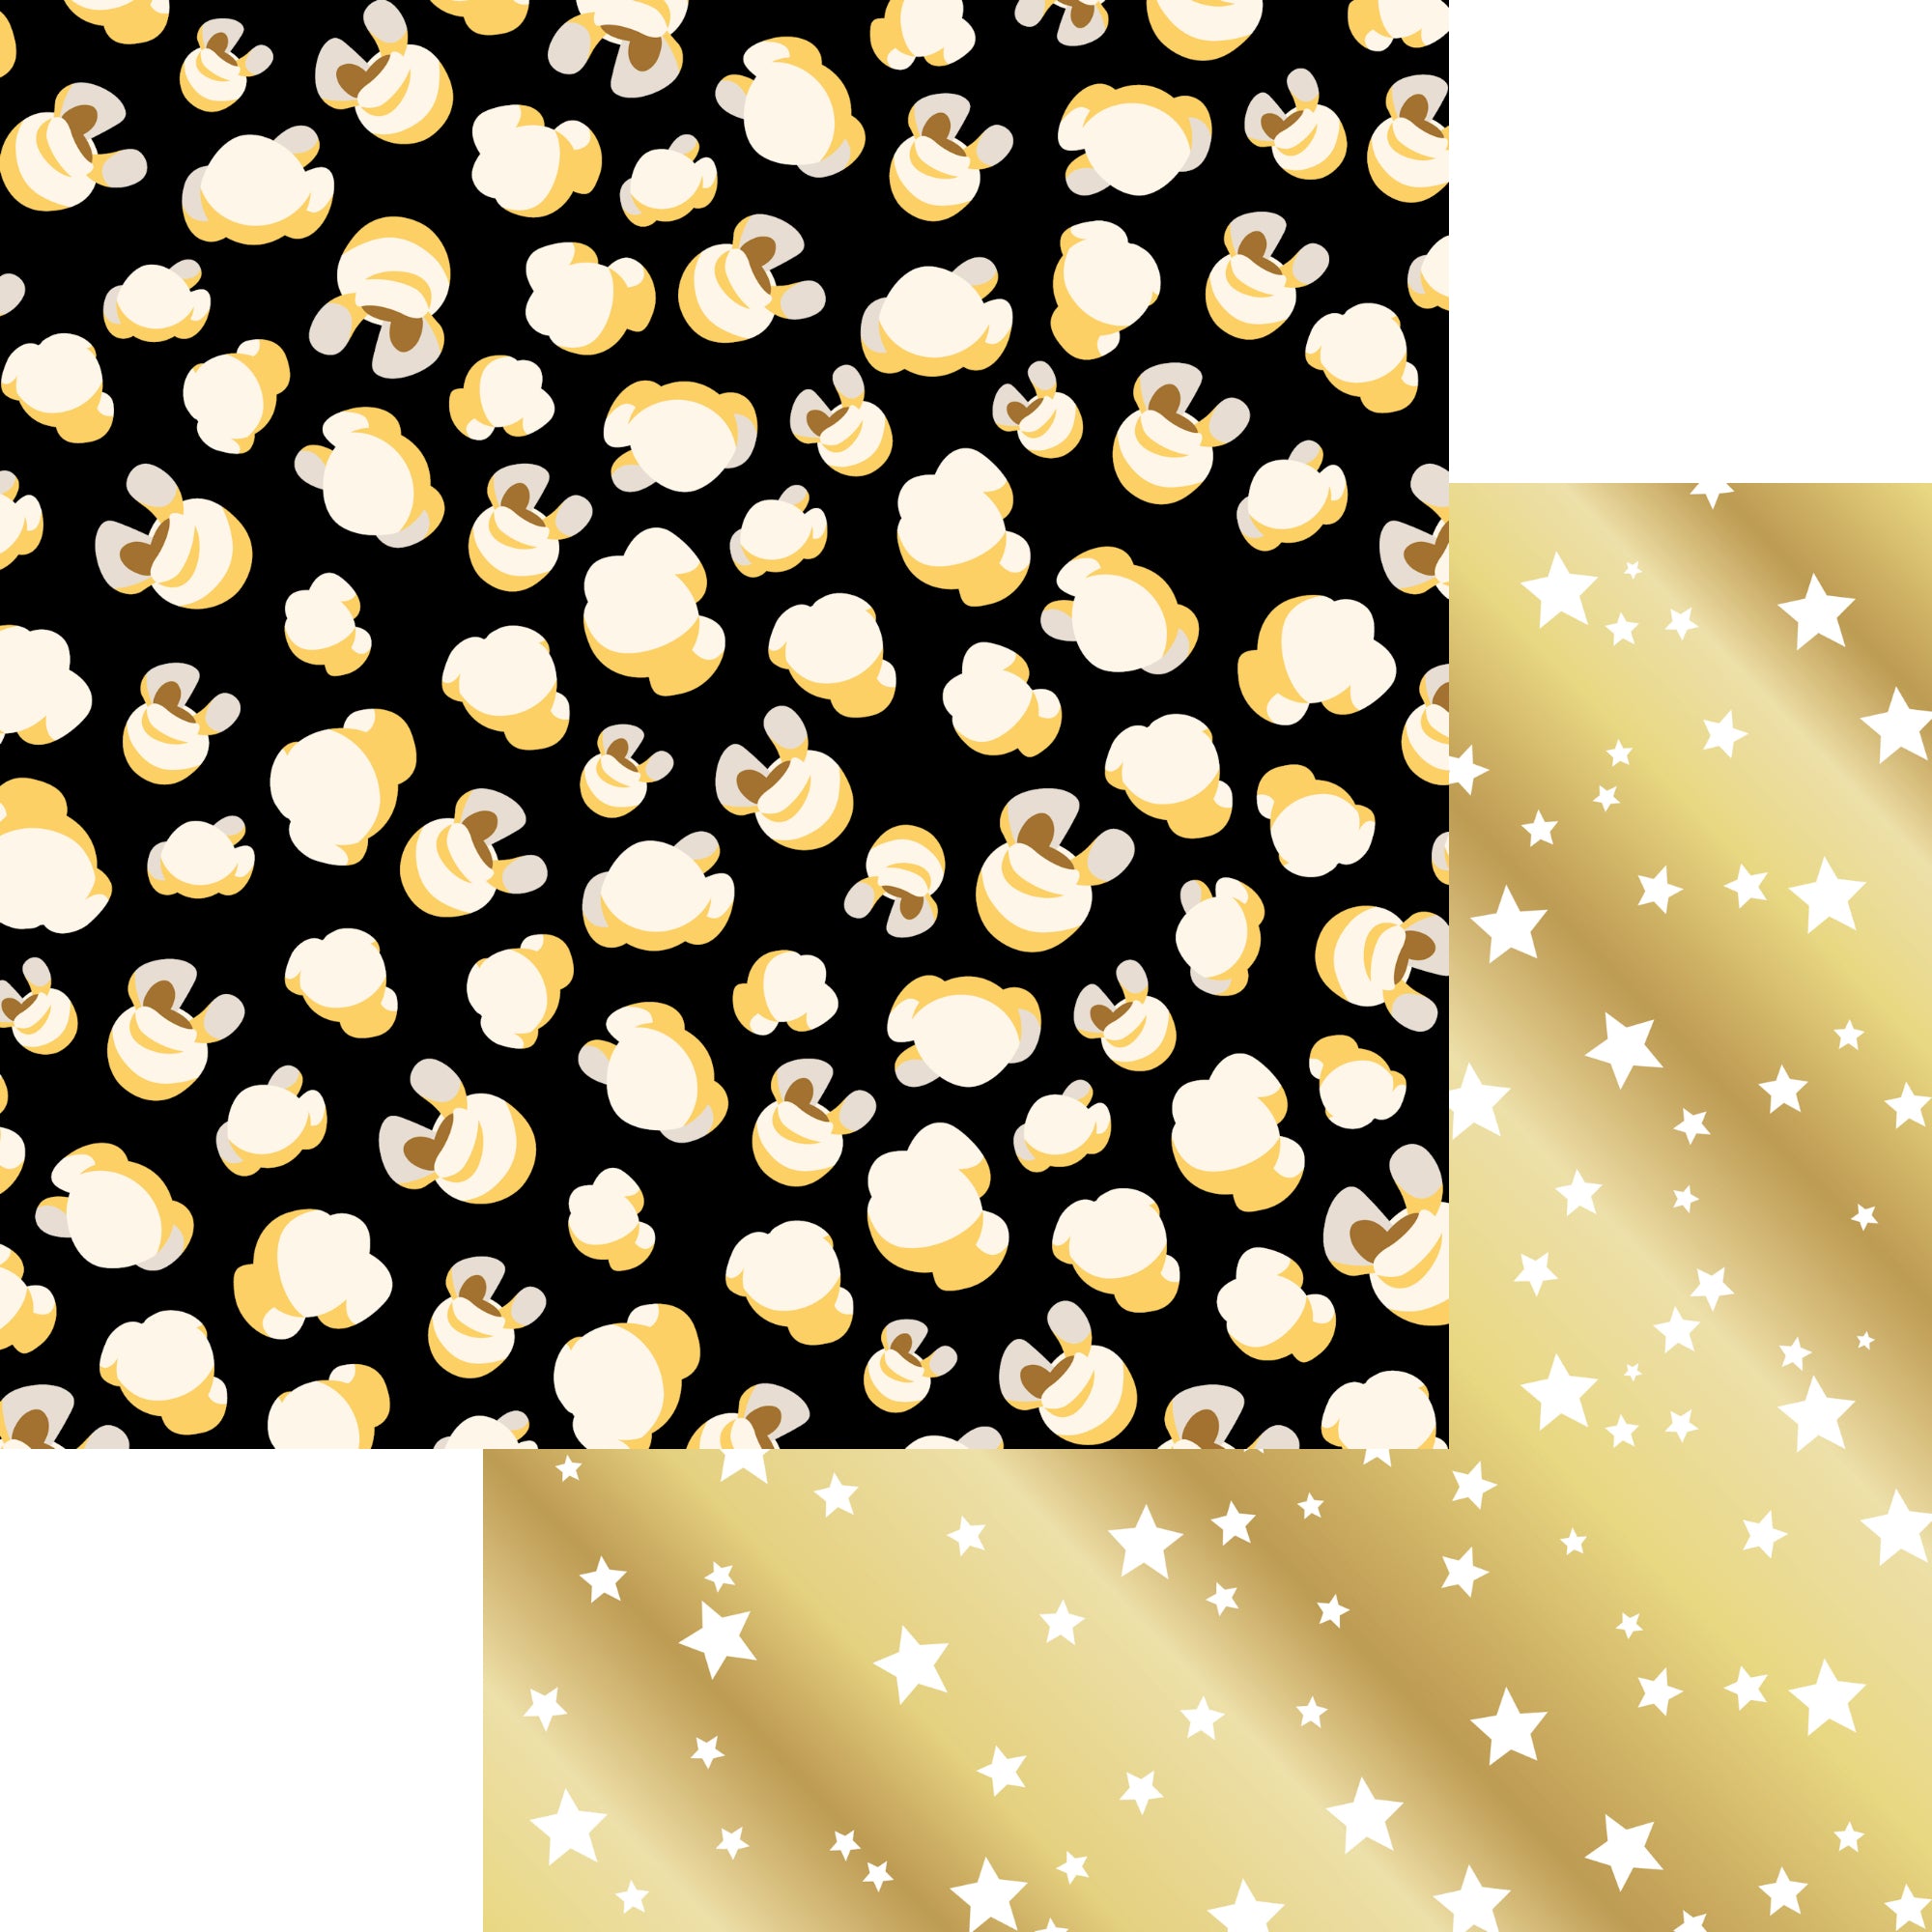 Movie Time Collection Hot Buttered Popcorn 12 x 12 Double-Sided Scrapbook Paper by SSC Designs